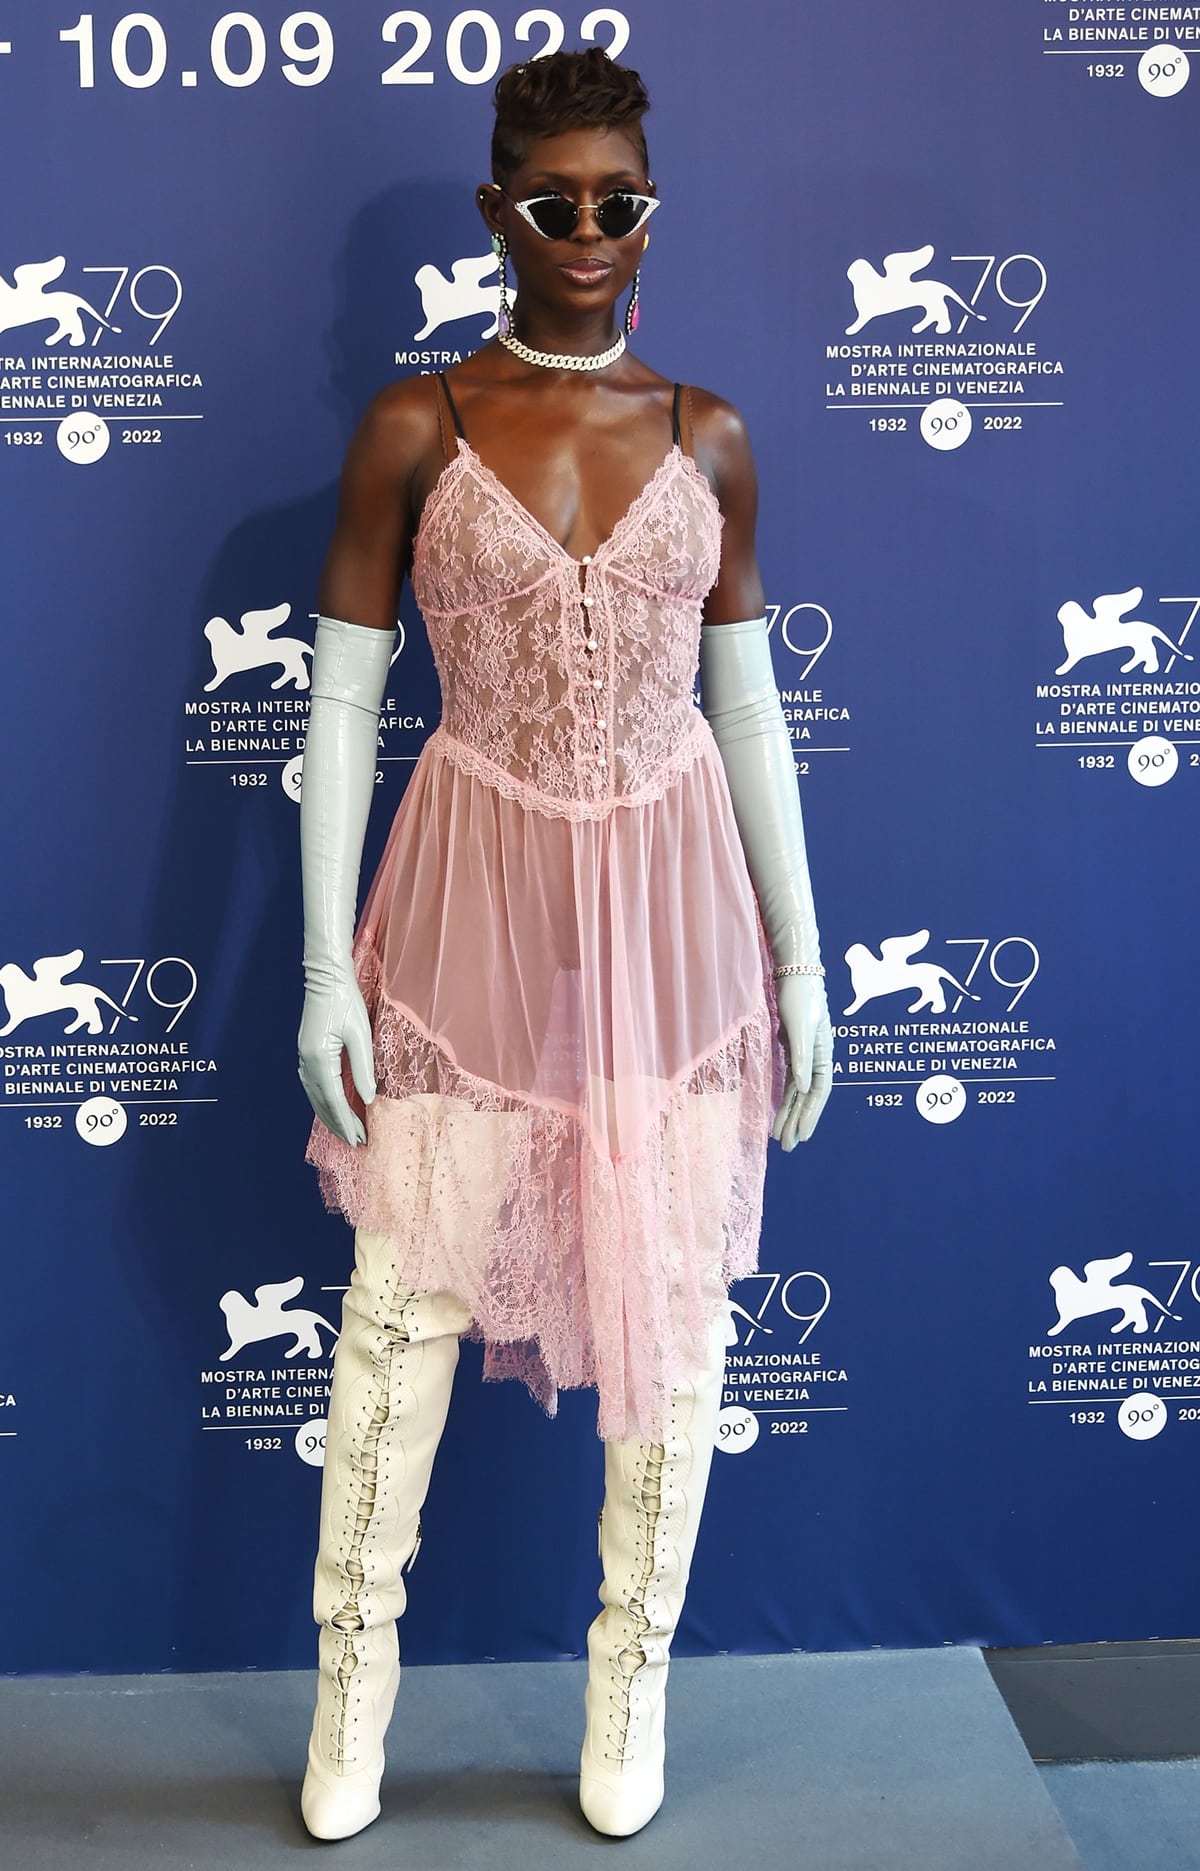 Jodie Turner-Smith in a baby pink Gucci lace gown with white boots at the photocall for "White Noise" at the 79th Venice International Film Festival